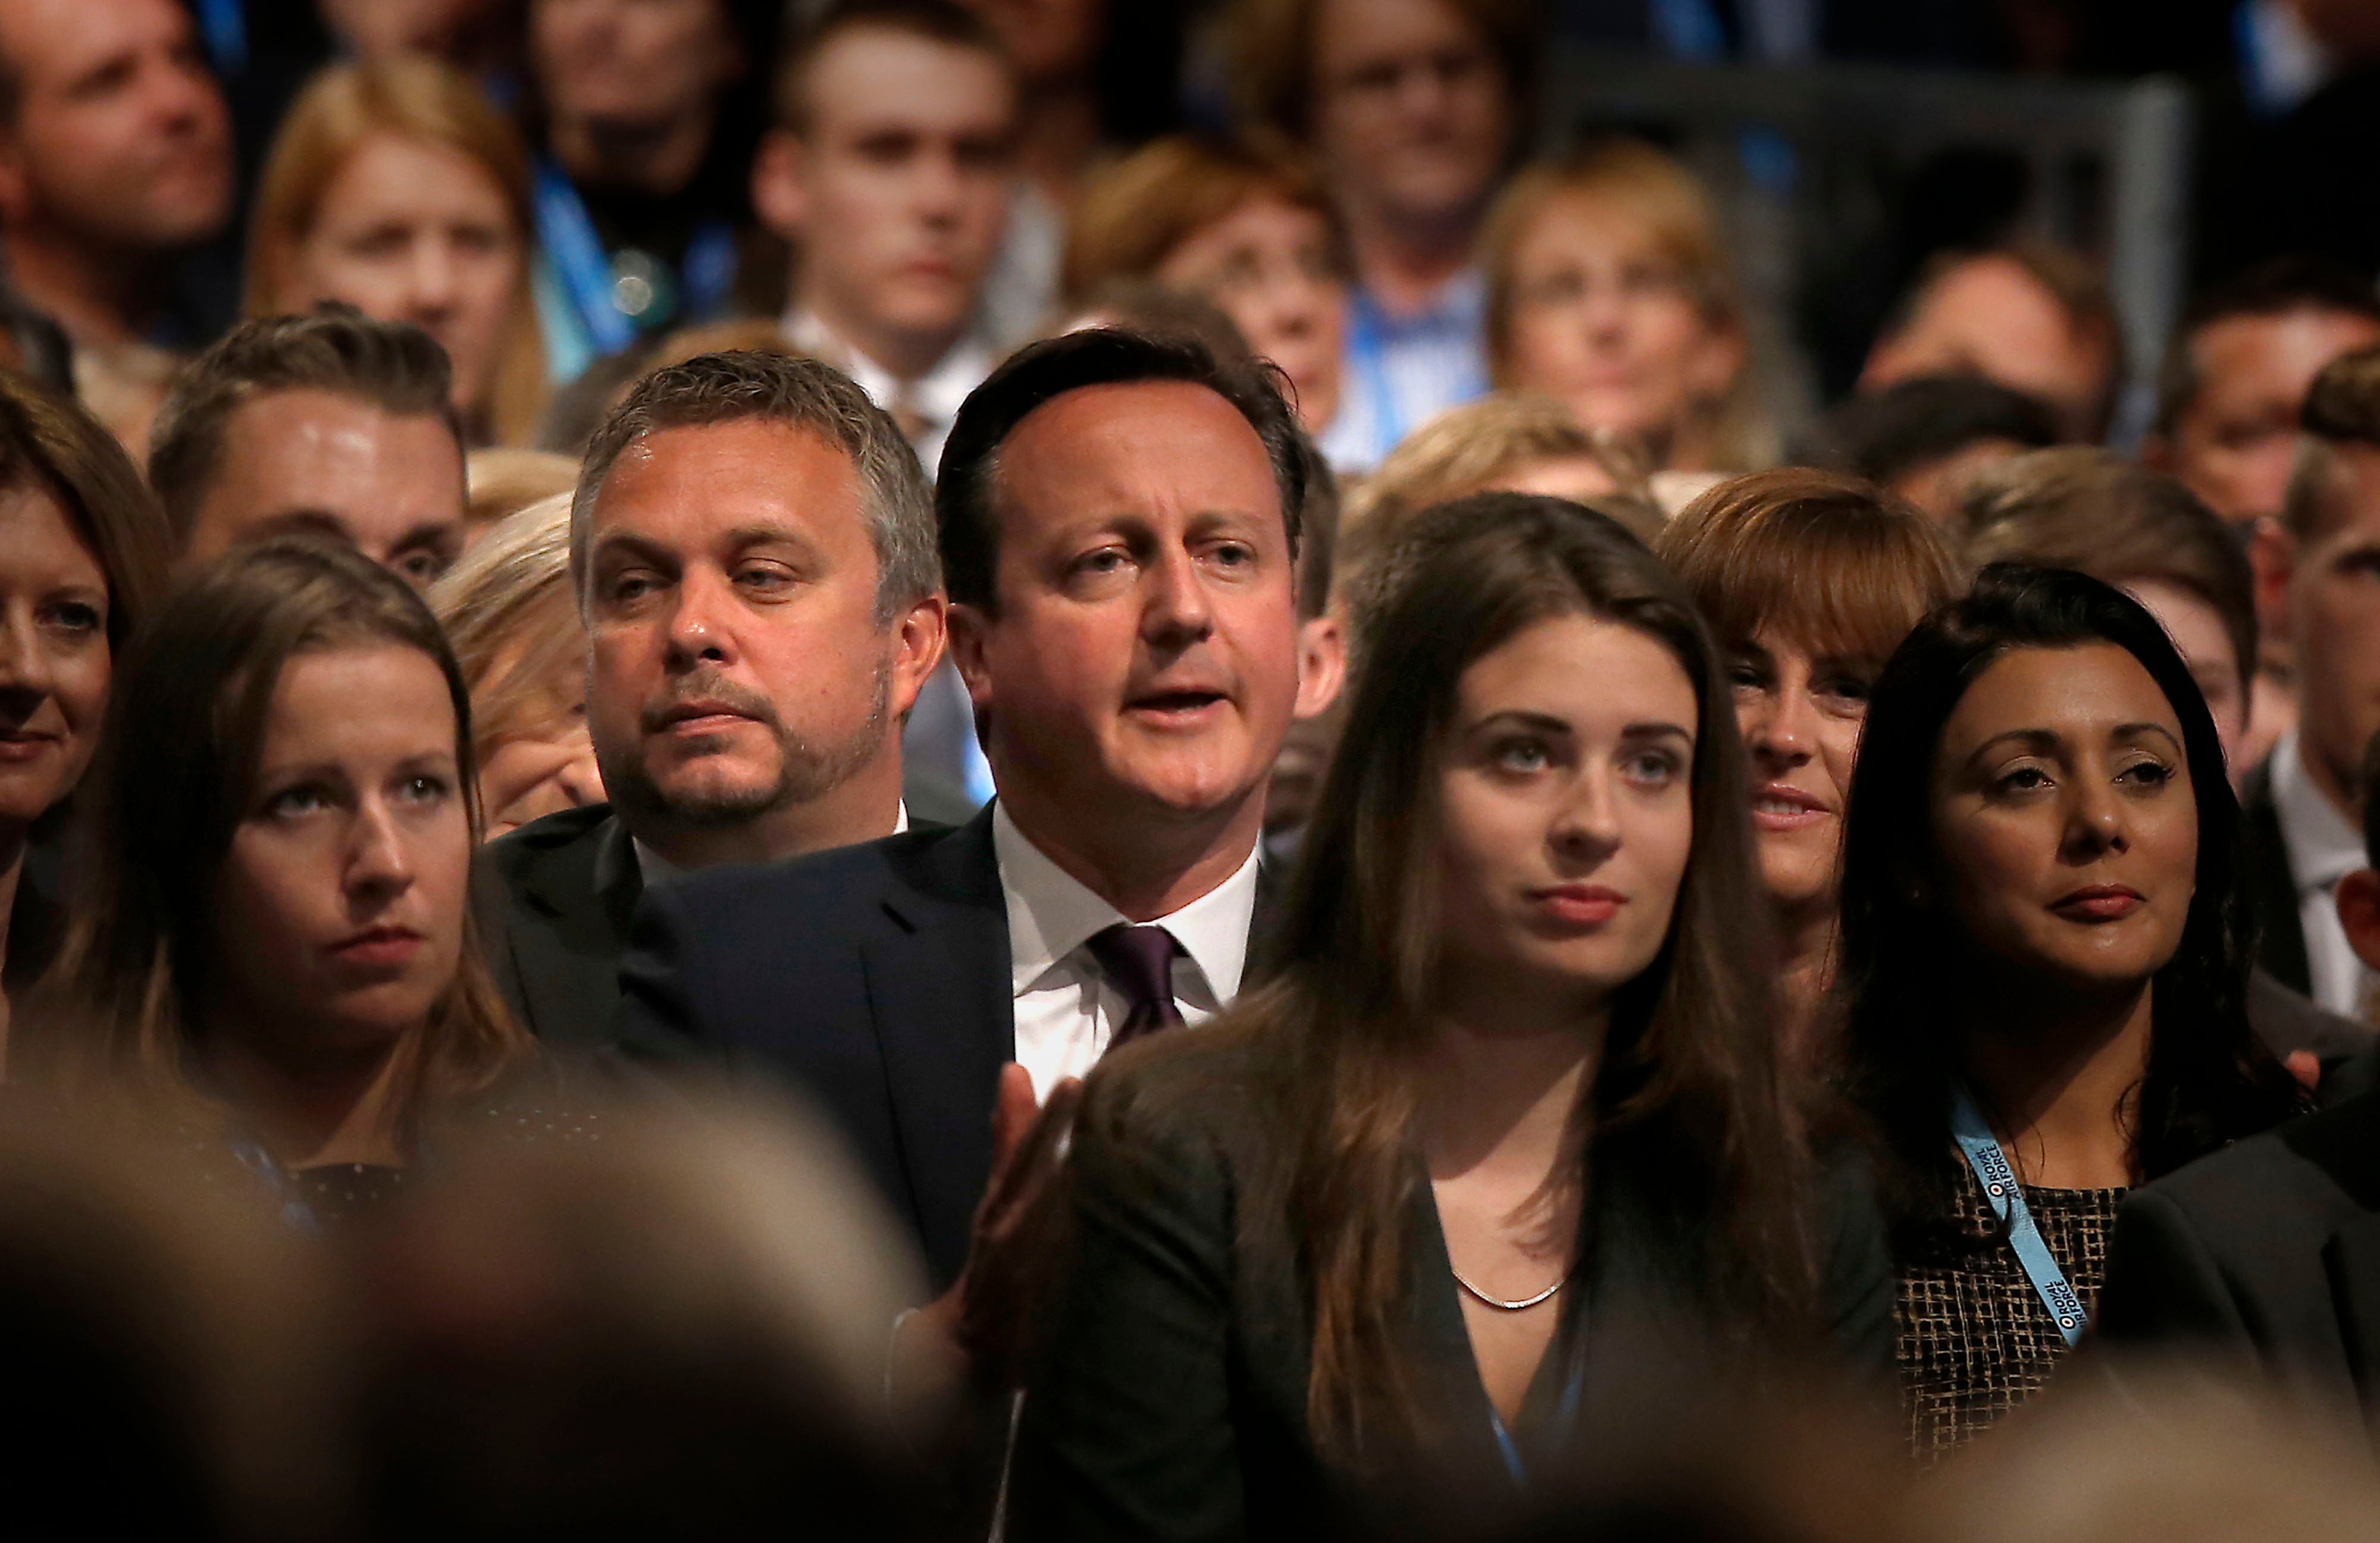 David Cameron watches on as George Osborne delivers his keynote speech to the Tory party conference